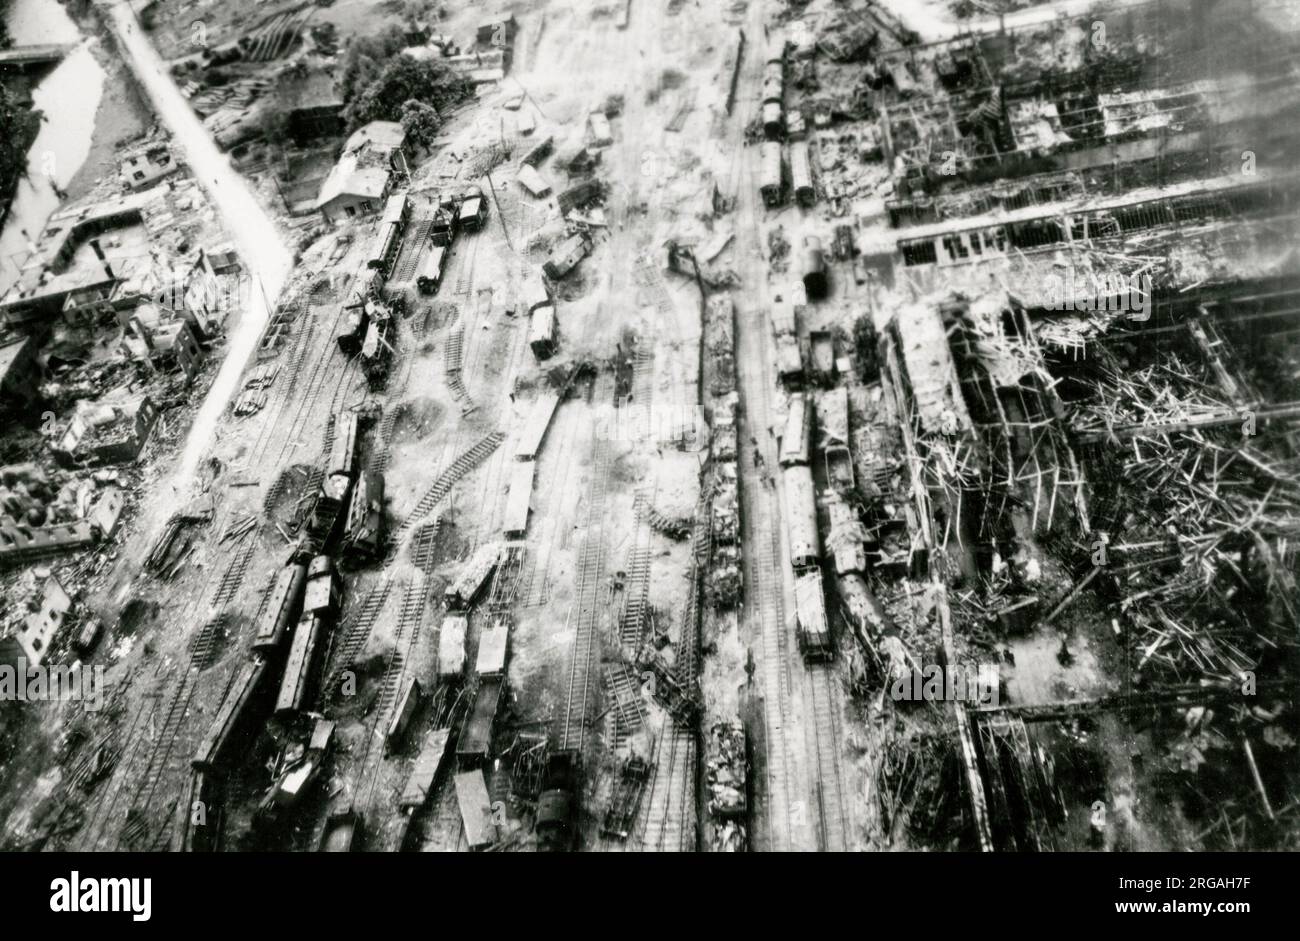 Vintage World War II photograph - official US military photo: Siegen, Germany, bomb damage to the railway marshalling yards inflicted by Allied bombers. Stock Photo